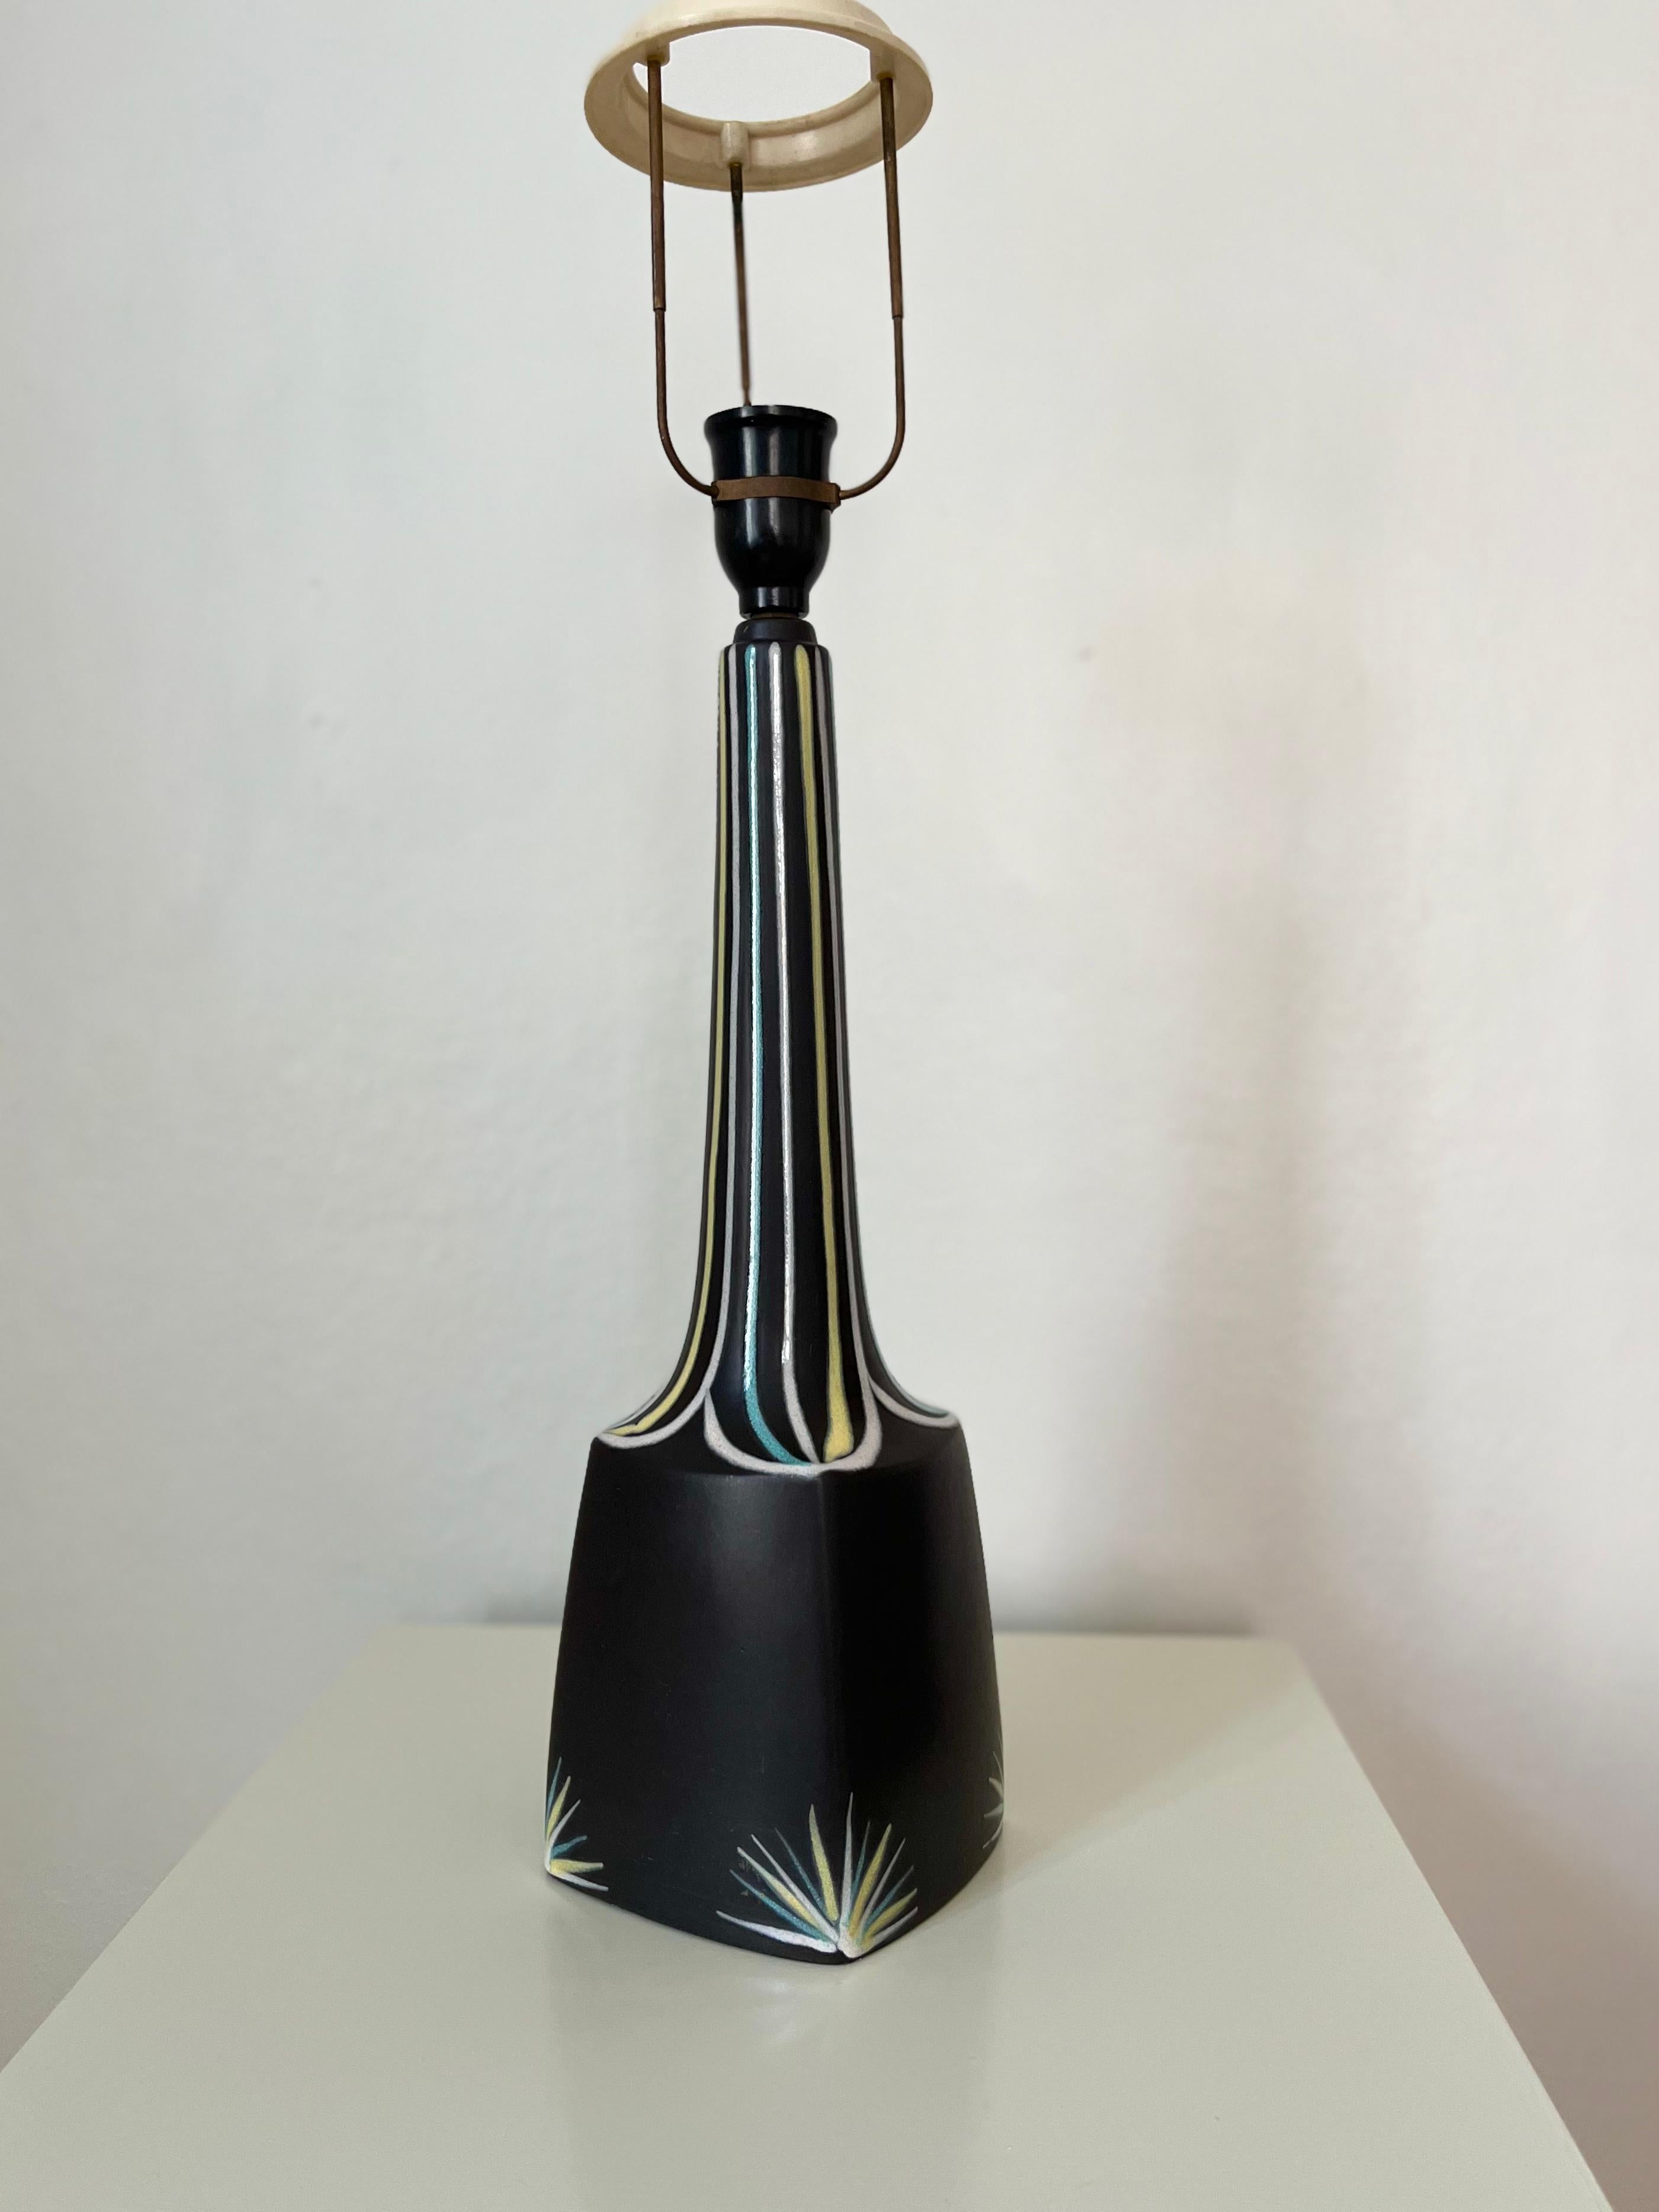 1960s tall Danish ceramics table lamp designed by Svend Aage Holm-Sørensen for Søholm

Renowned Svend Aage Holm-Sørensen designed this tall table lamp for Søholm in the 1960s. Black ceramics base with handpainted decorations in soft tones of cream,